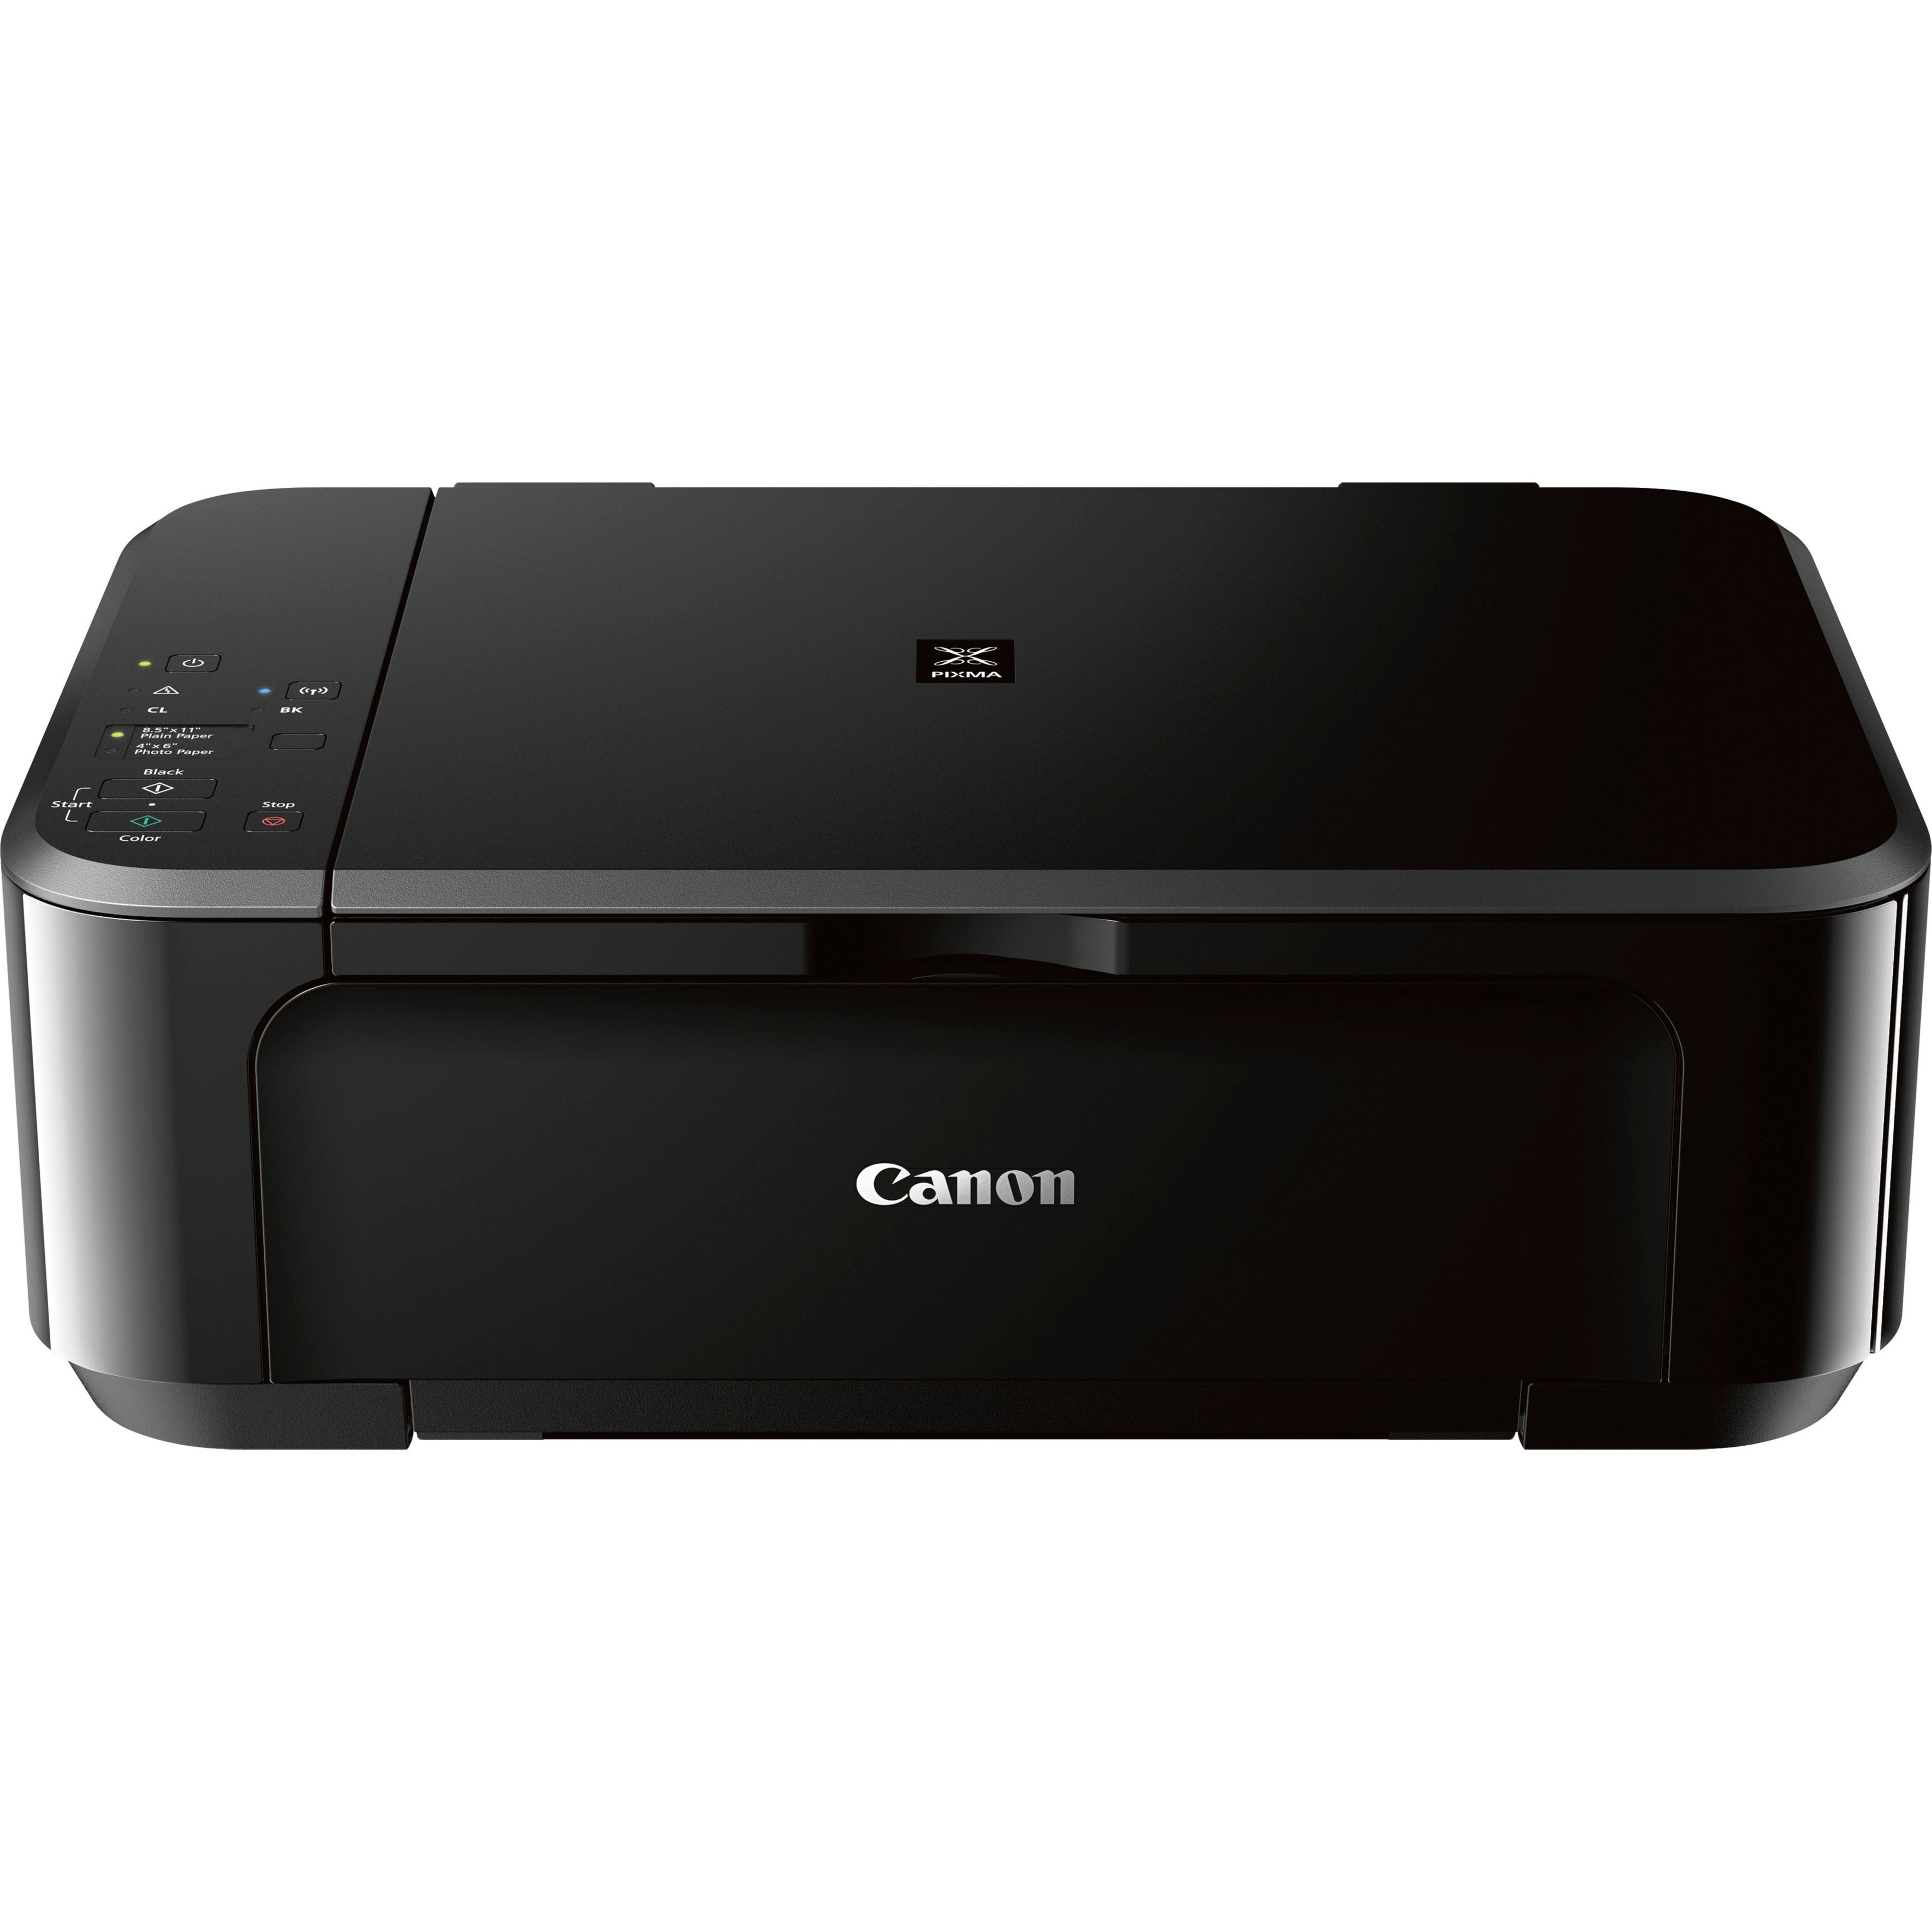 Canon 0515C002 PIXMA MG3620 Wireless Inkjet All-In-One Printer, Color, Flatbed Scanner, 1 Year Warranty, Energy Star, EPEAT Silver, USB, AC Supply